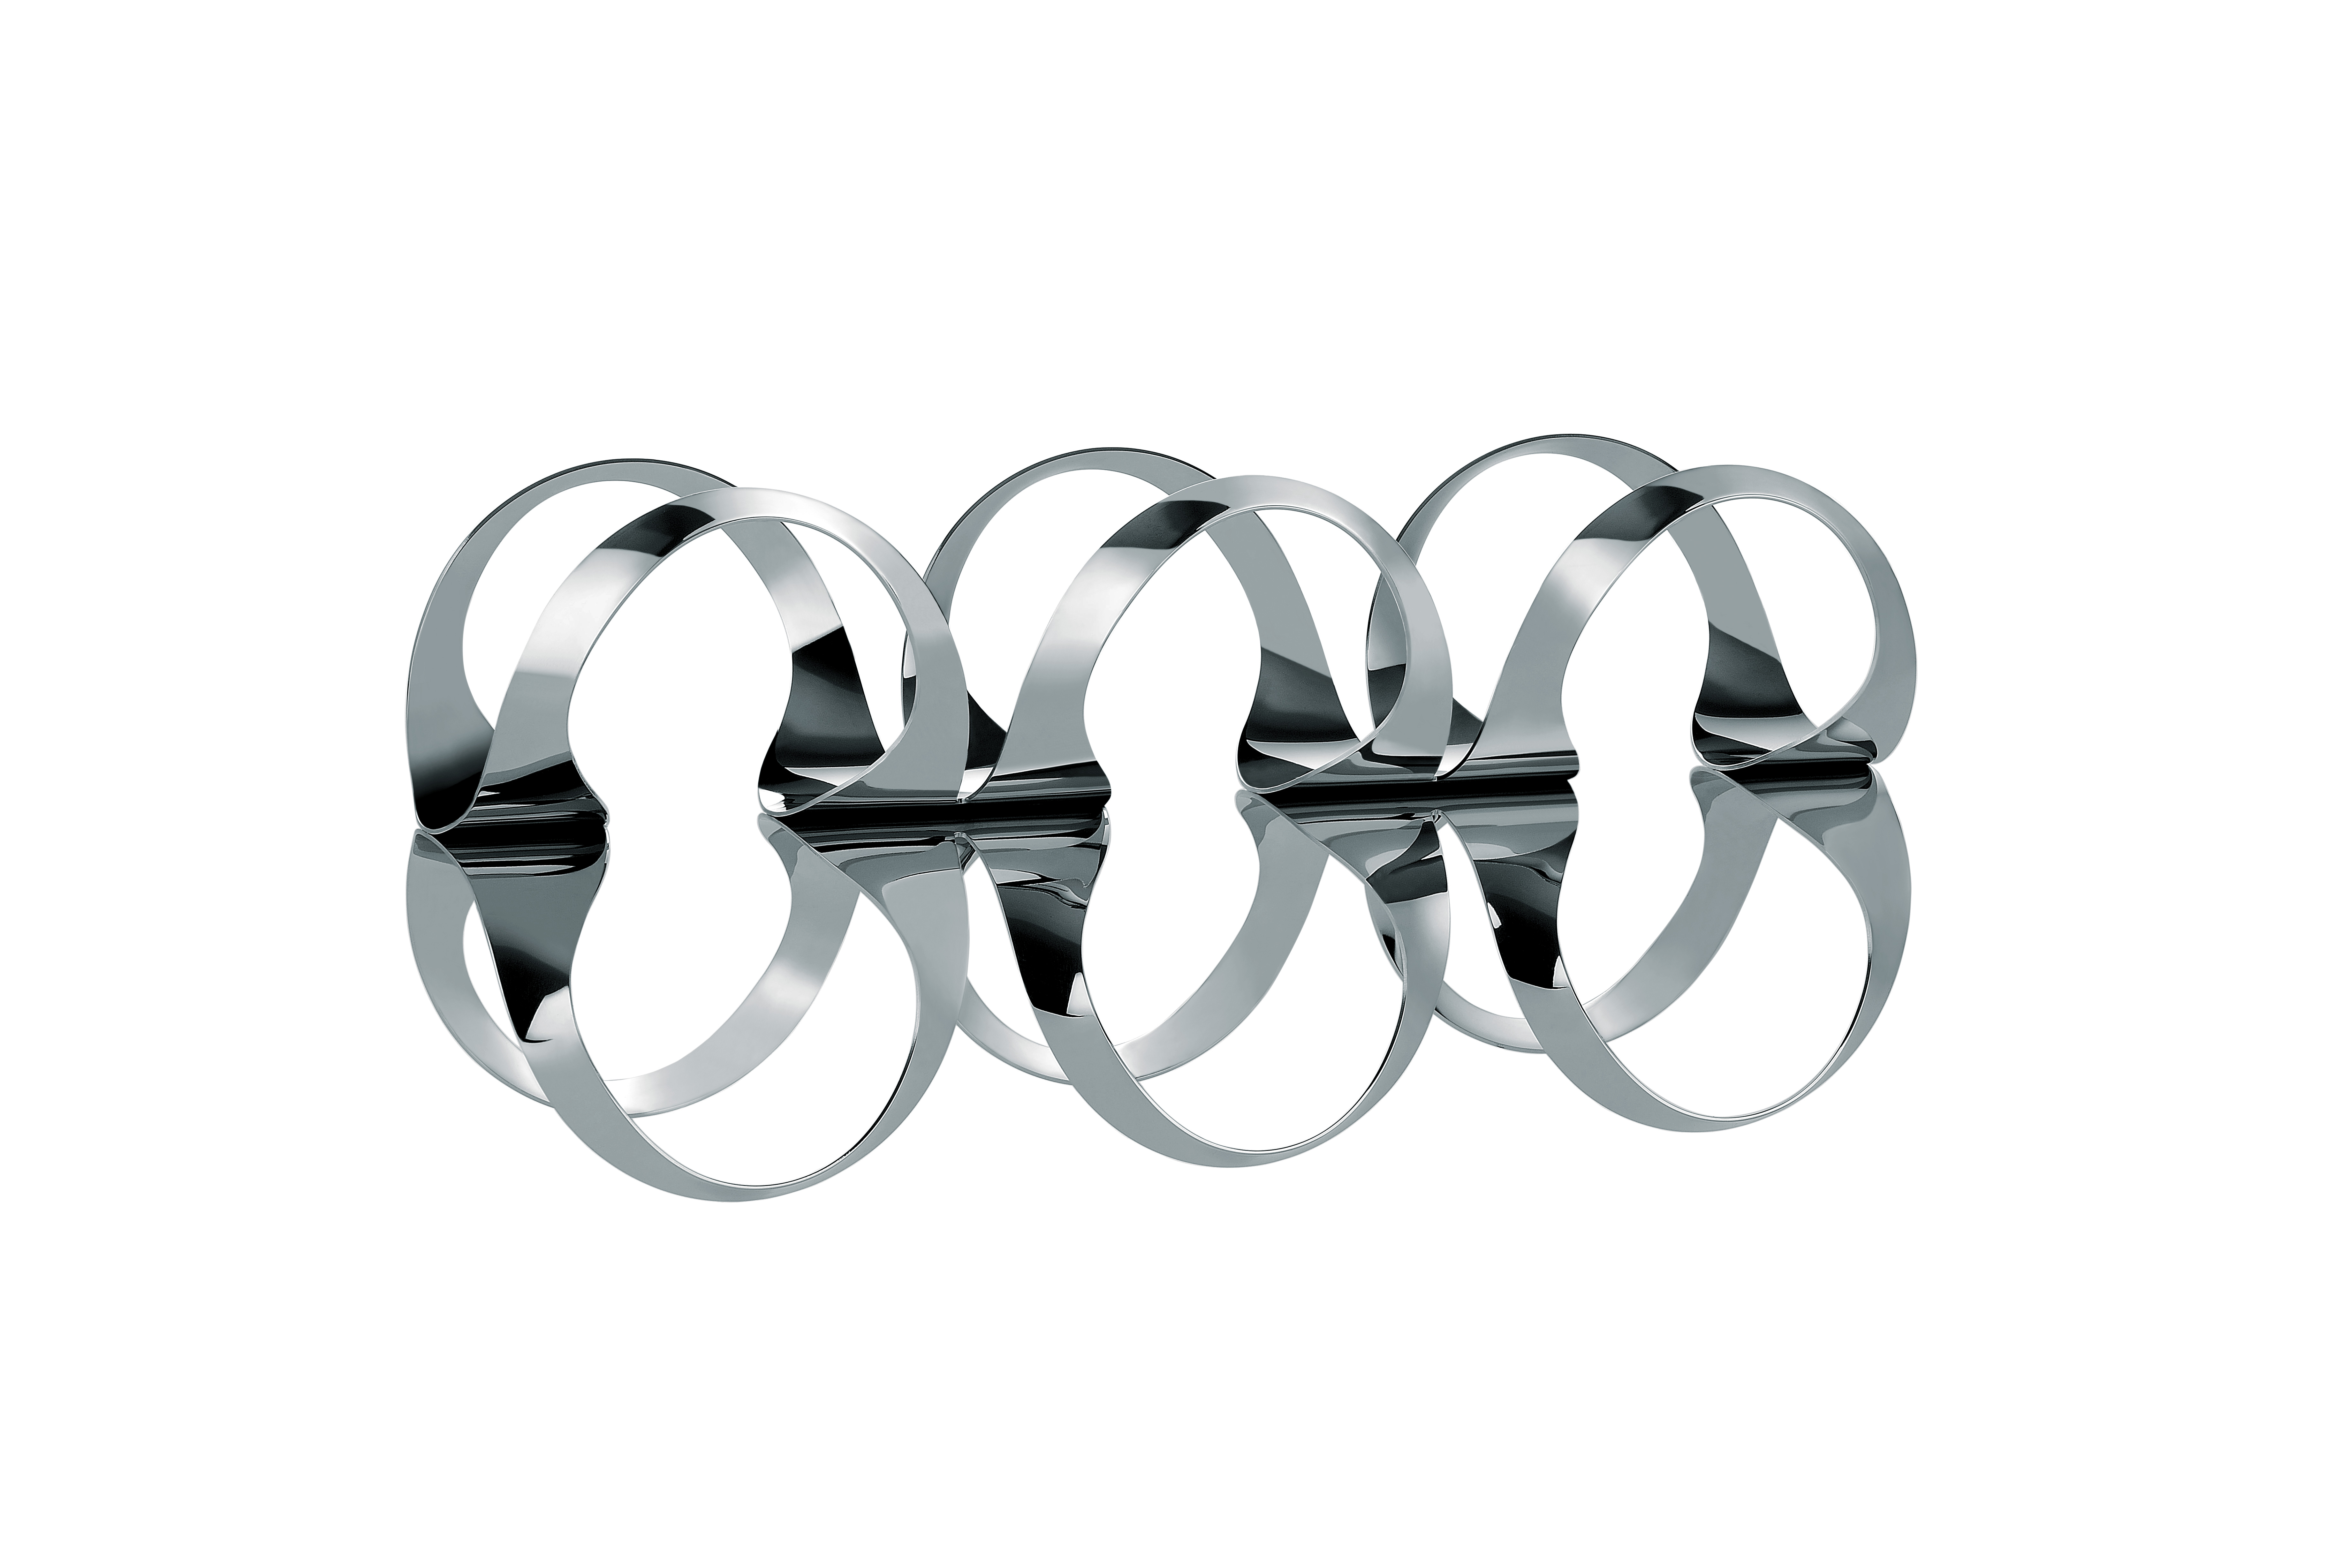 Introducing the Ribbon Wine Rack for Alessi